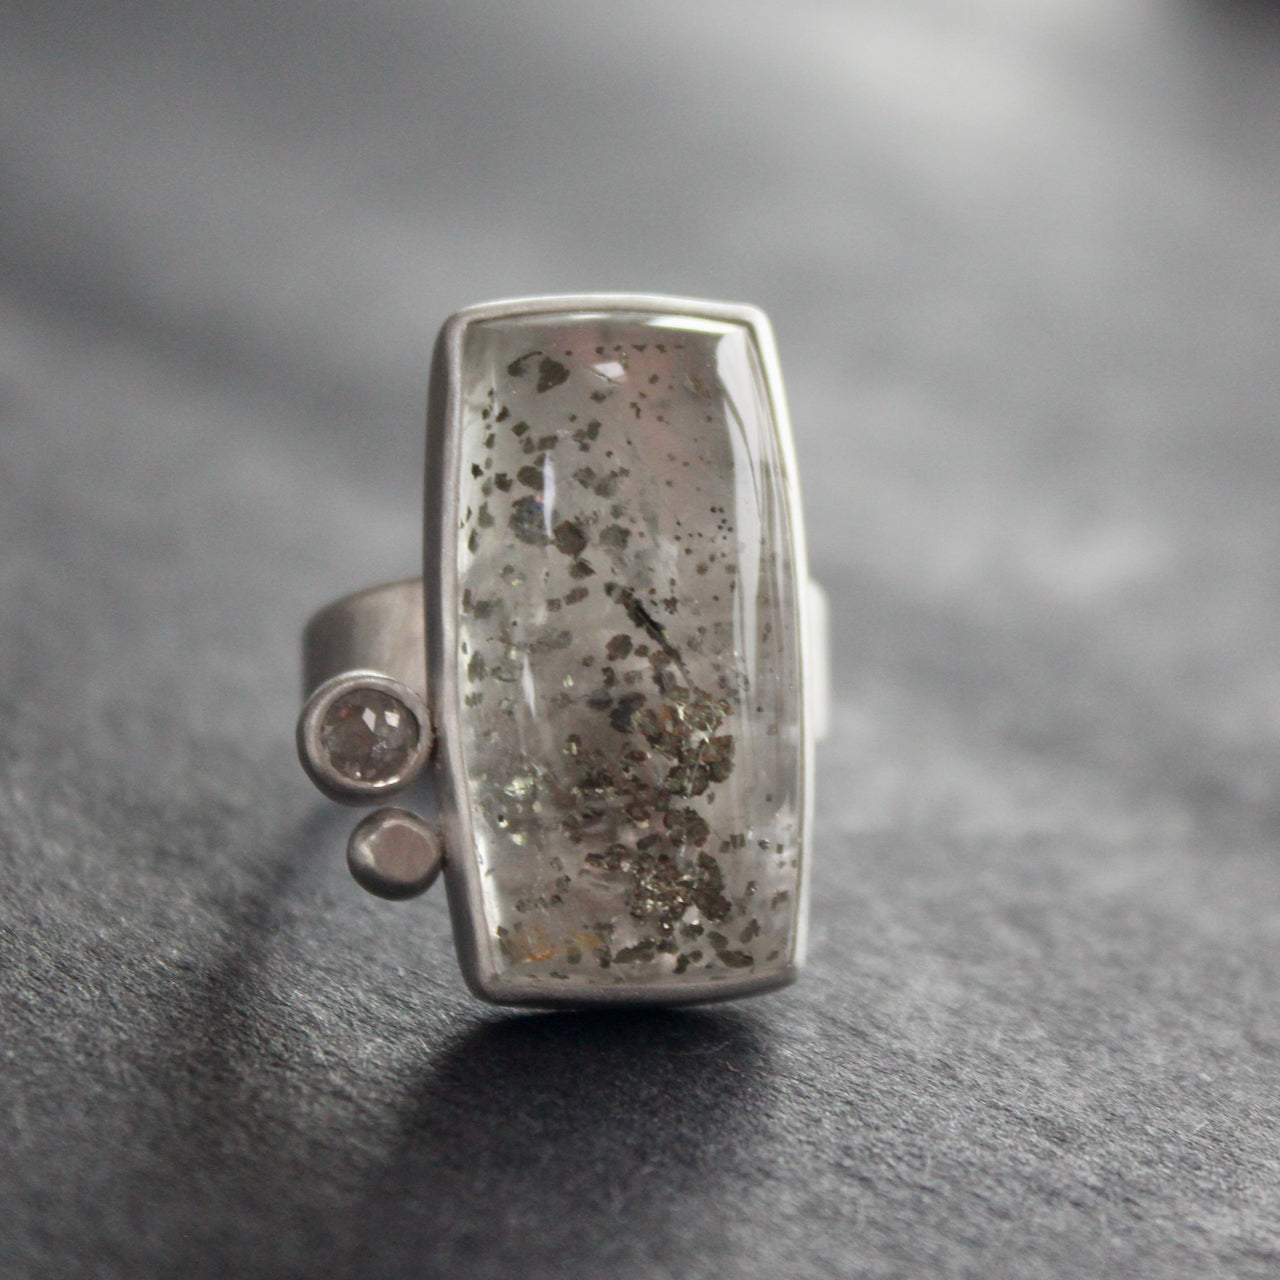 Silver ring featuring large rectangular quartz stone with small diamond and small silver ball to the side